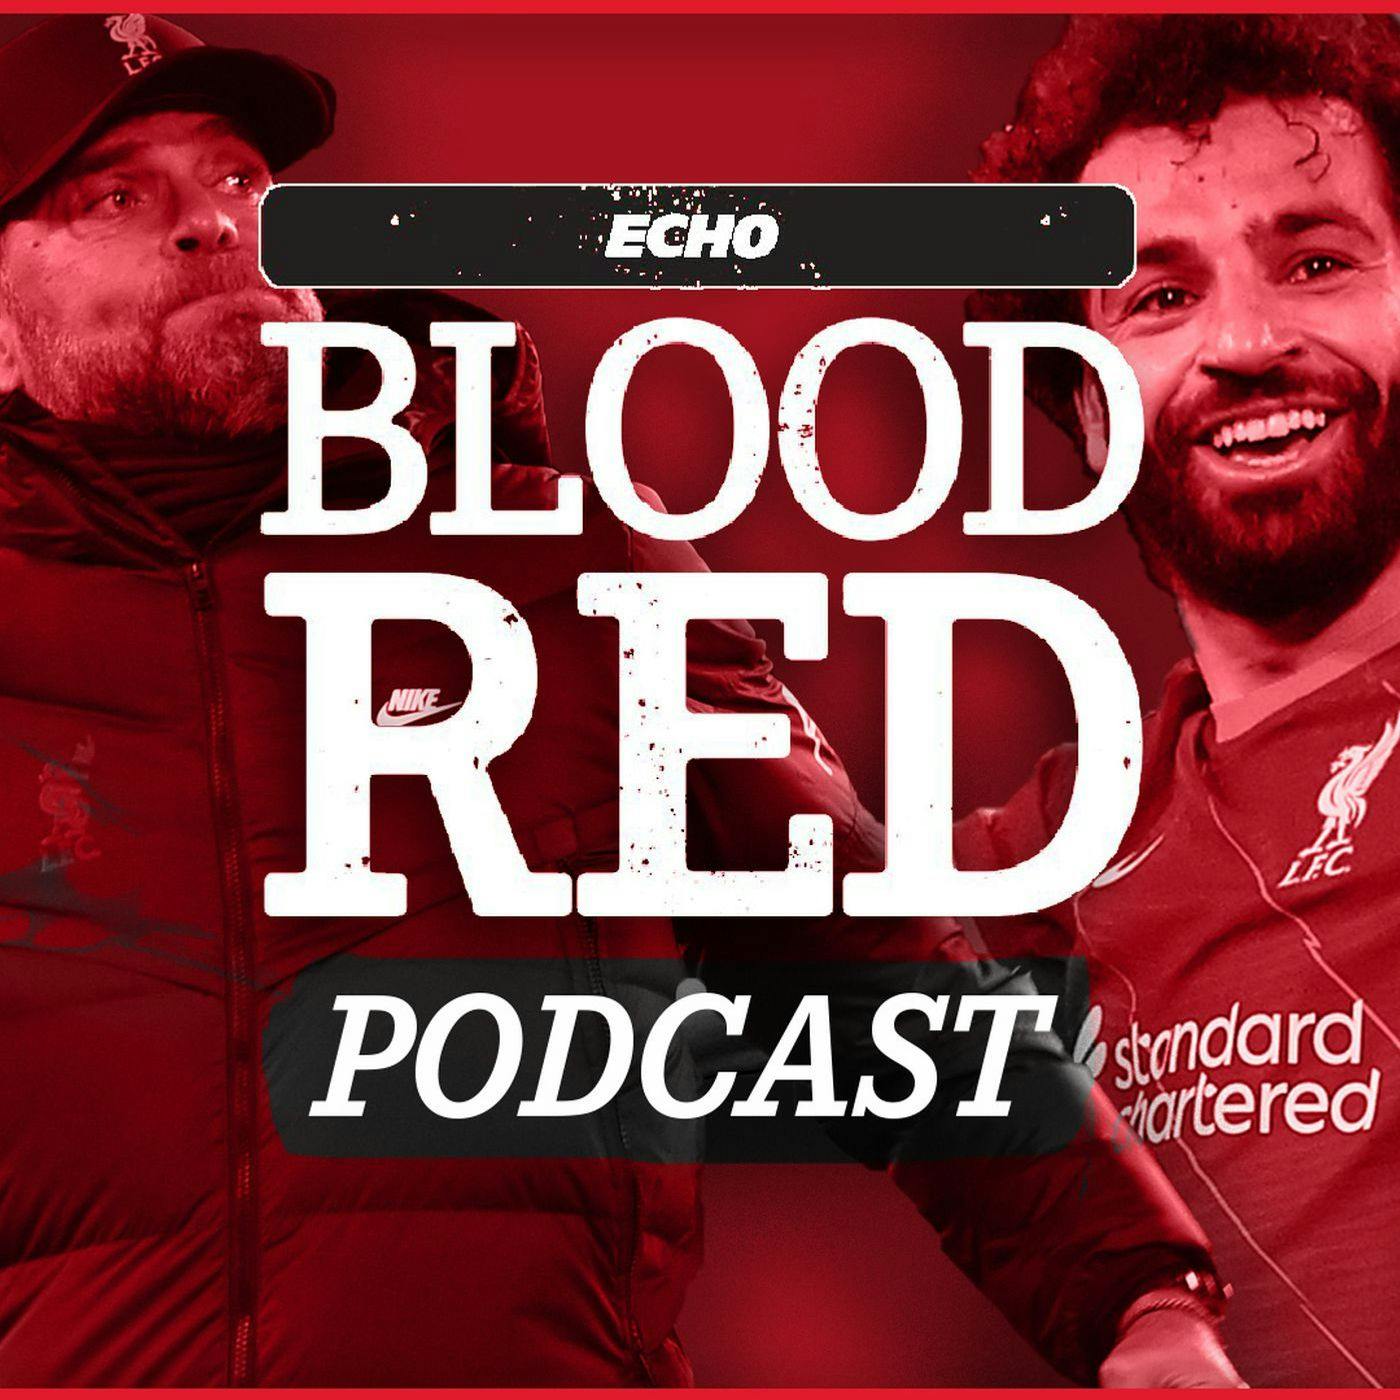 Blood Red: Liverpool sweep aside Arsenal | Jurgen Klopp to ring Champions League changes